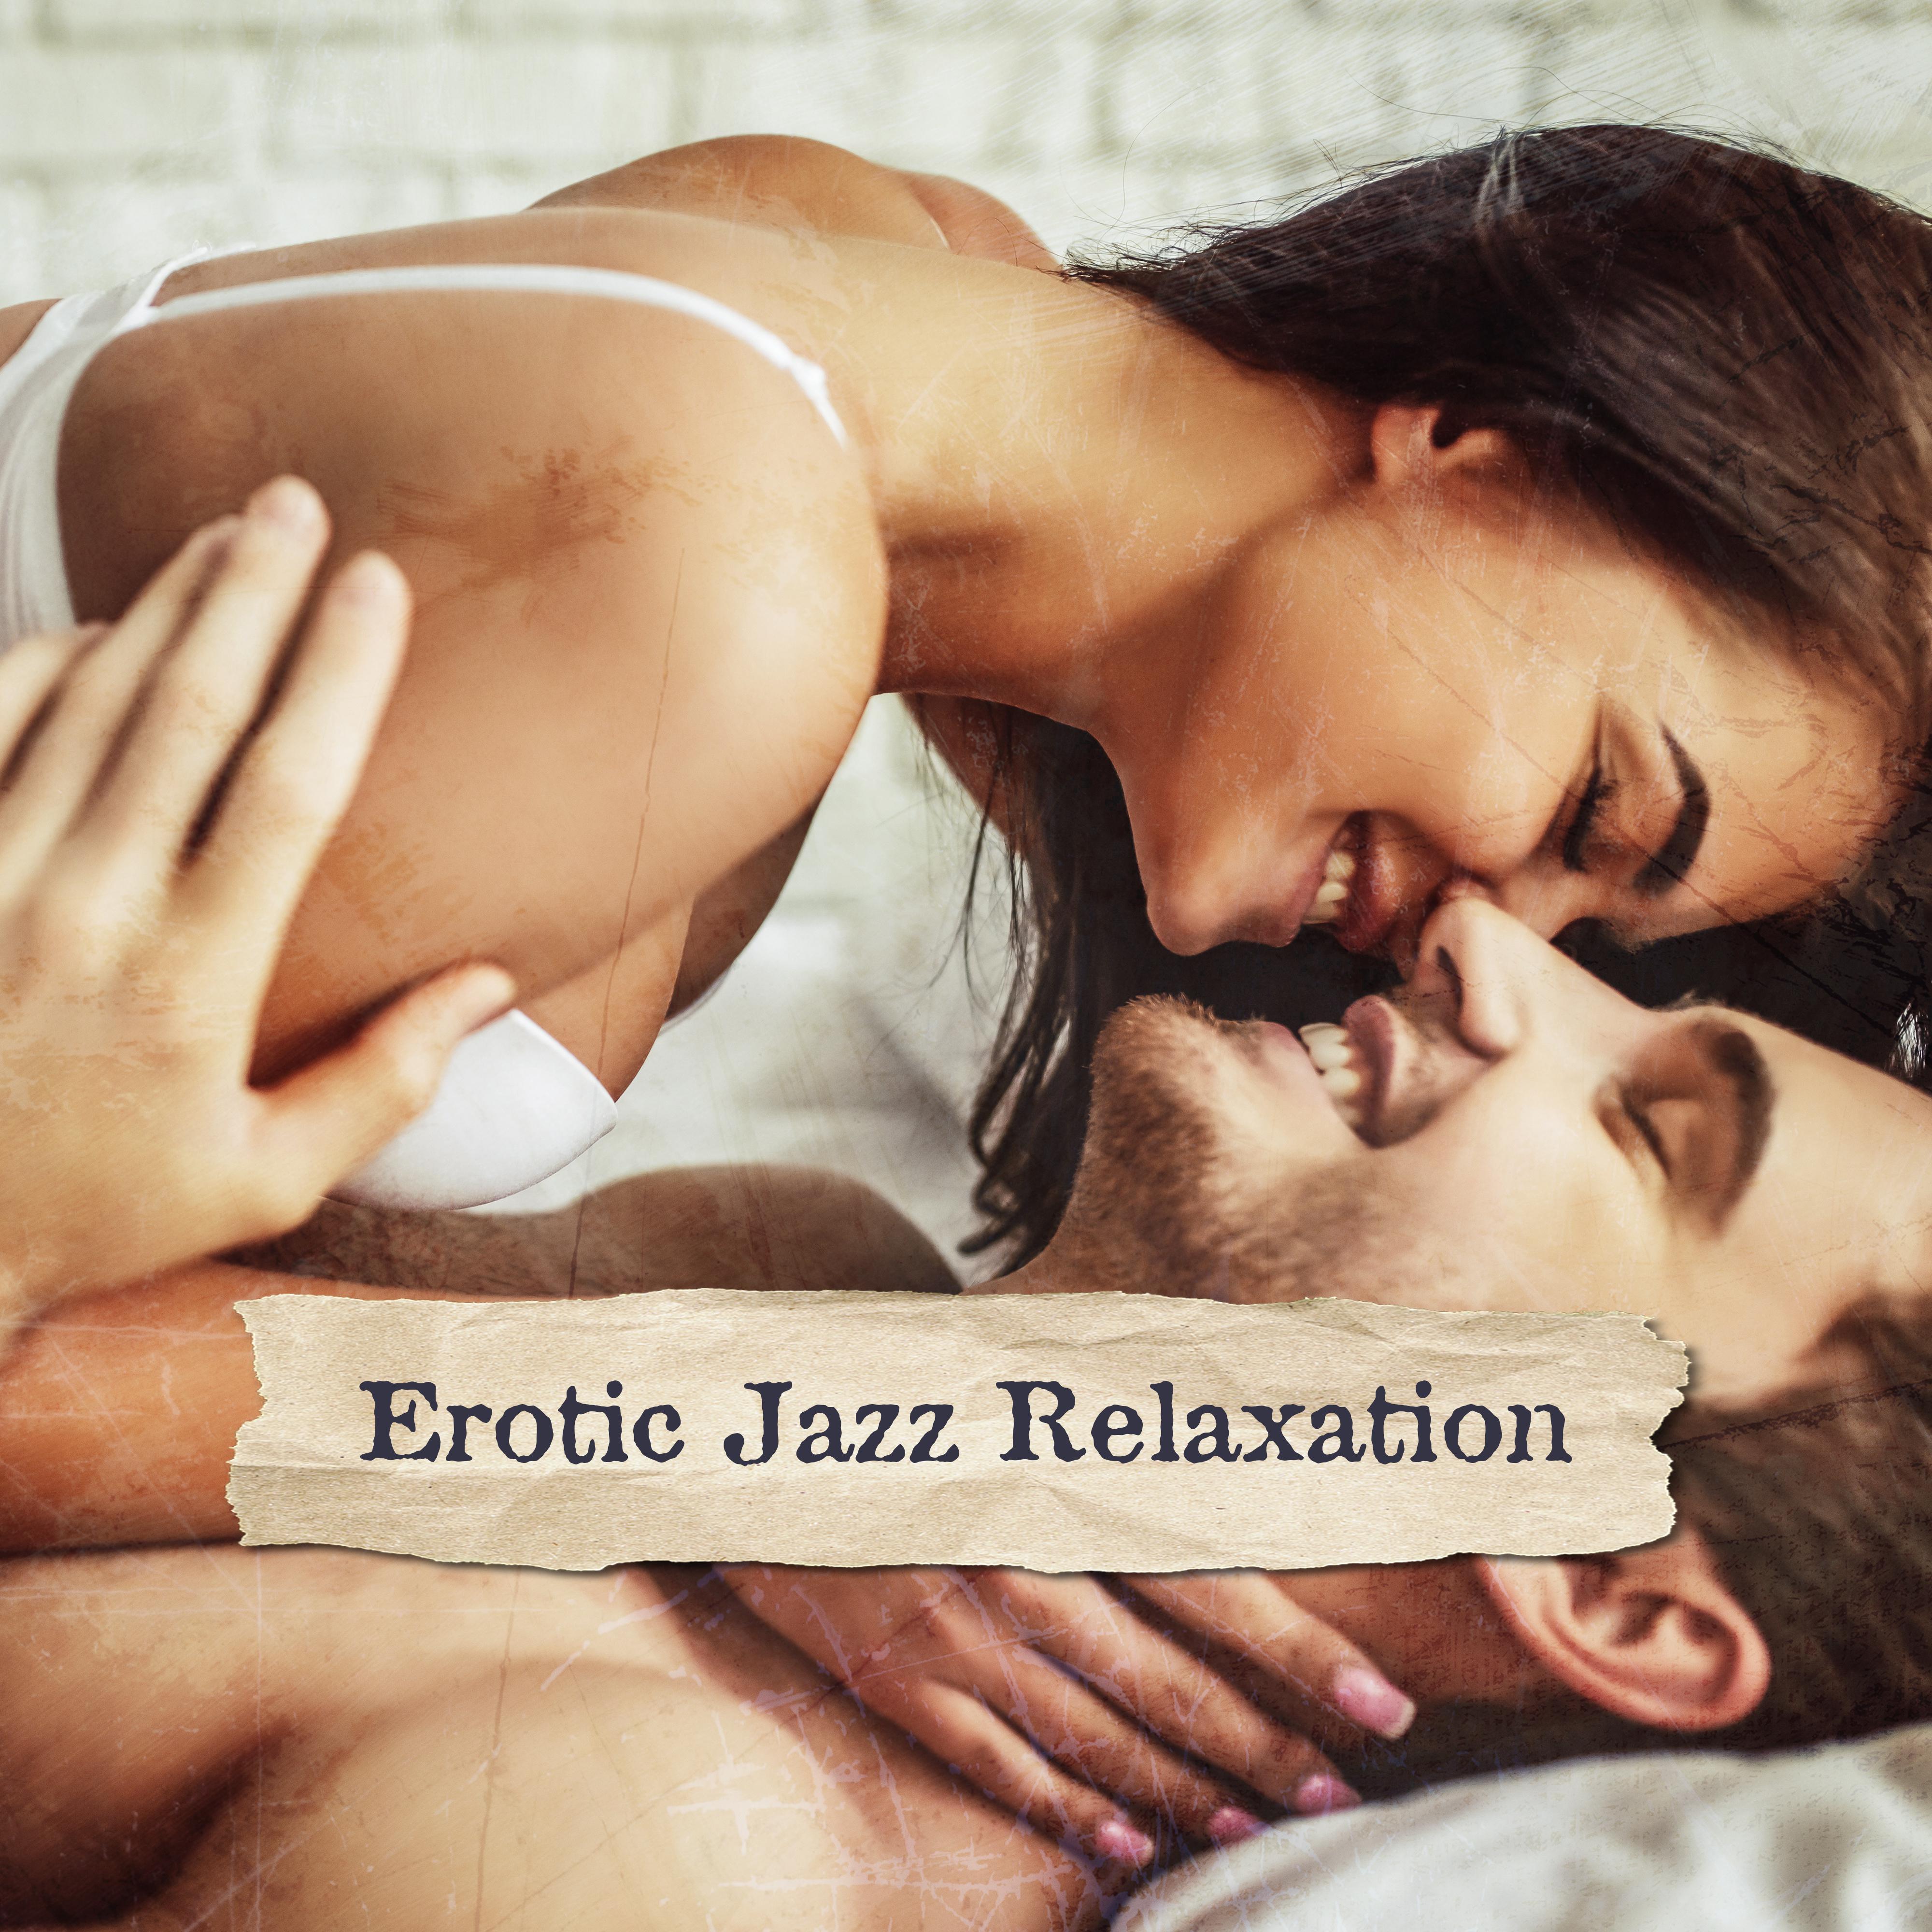 Erotic Jazz Relaxation: Sexual Couple Chillout in Bed After Midnight